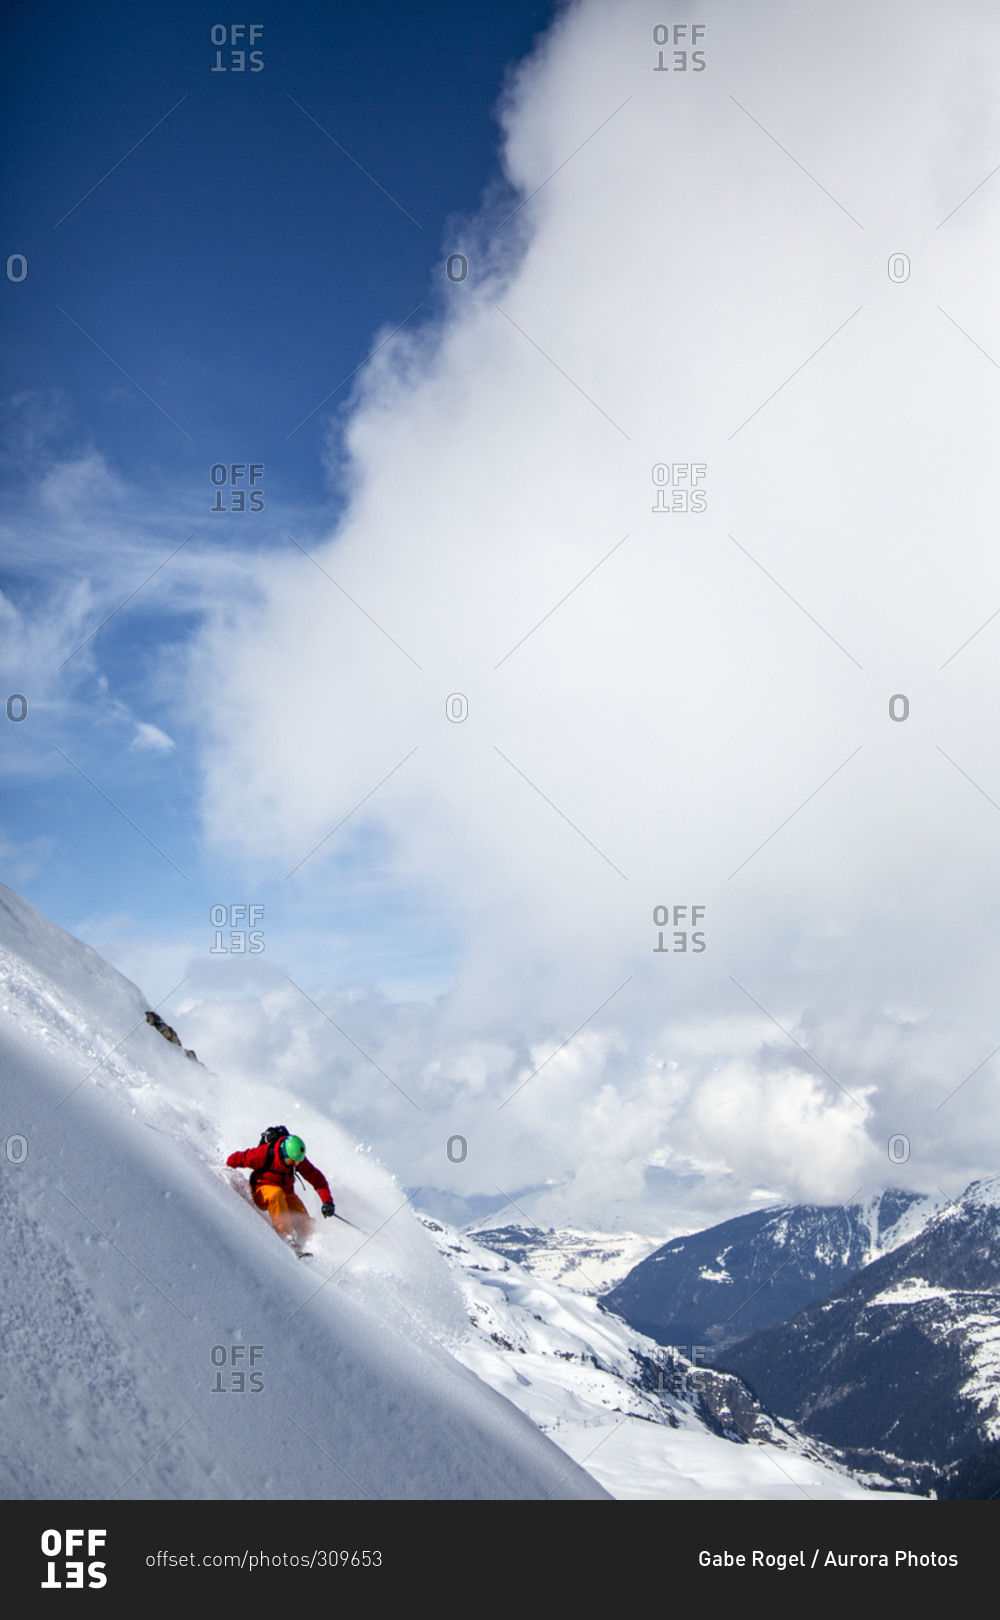 Skiing down a steep slope